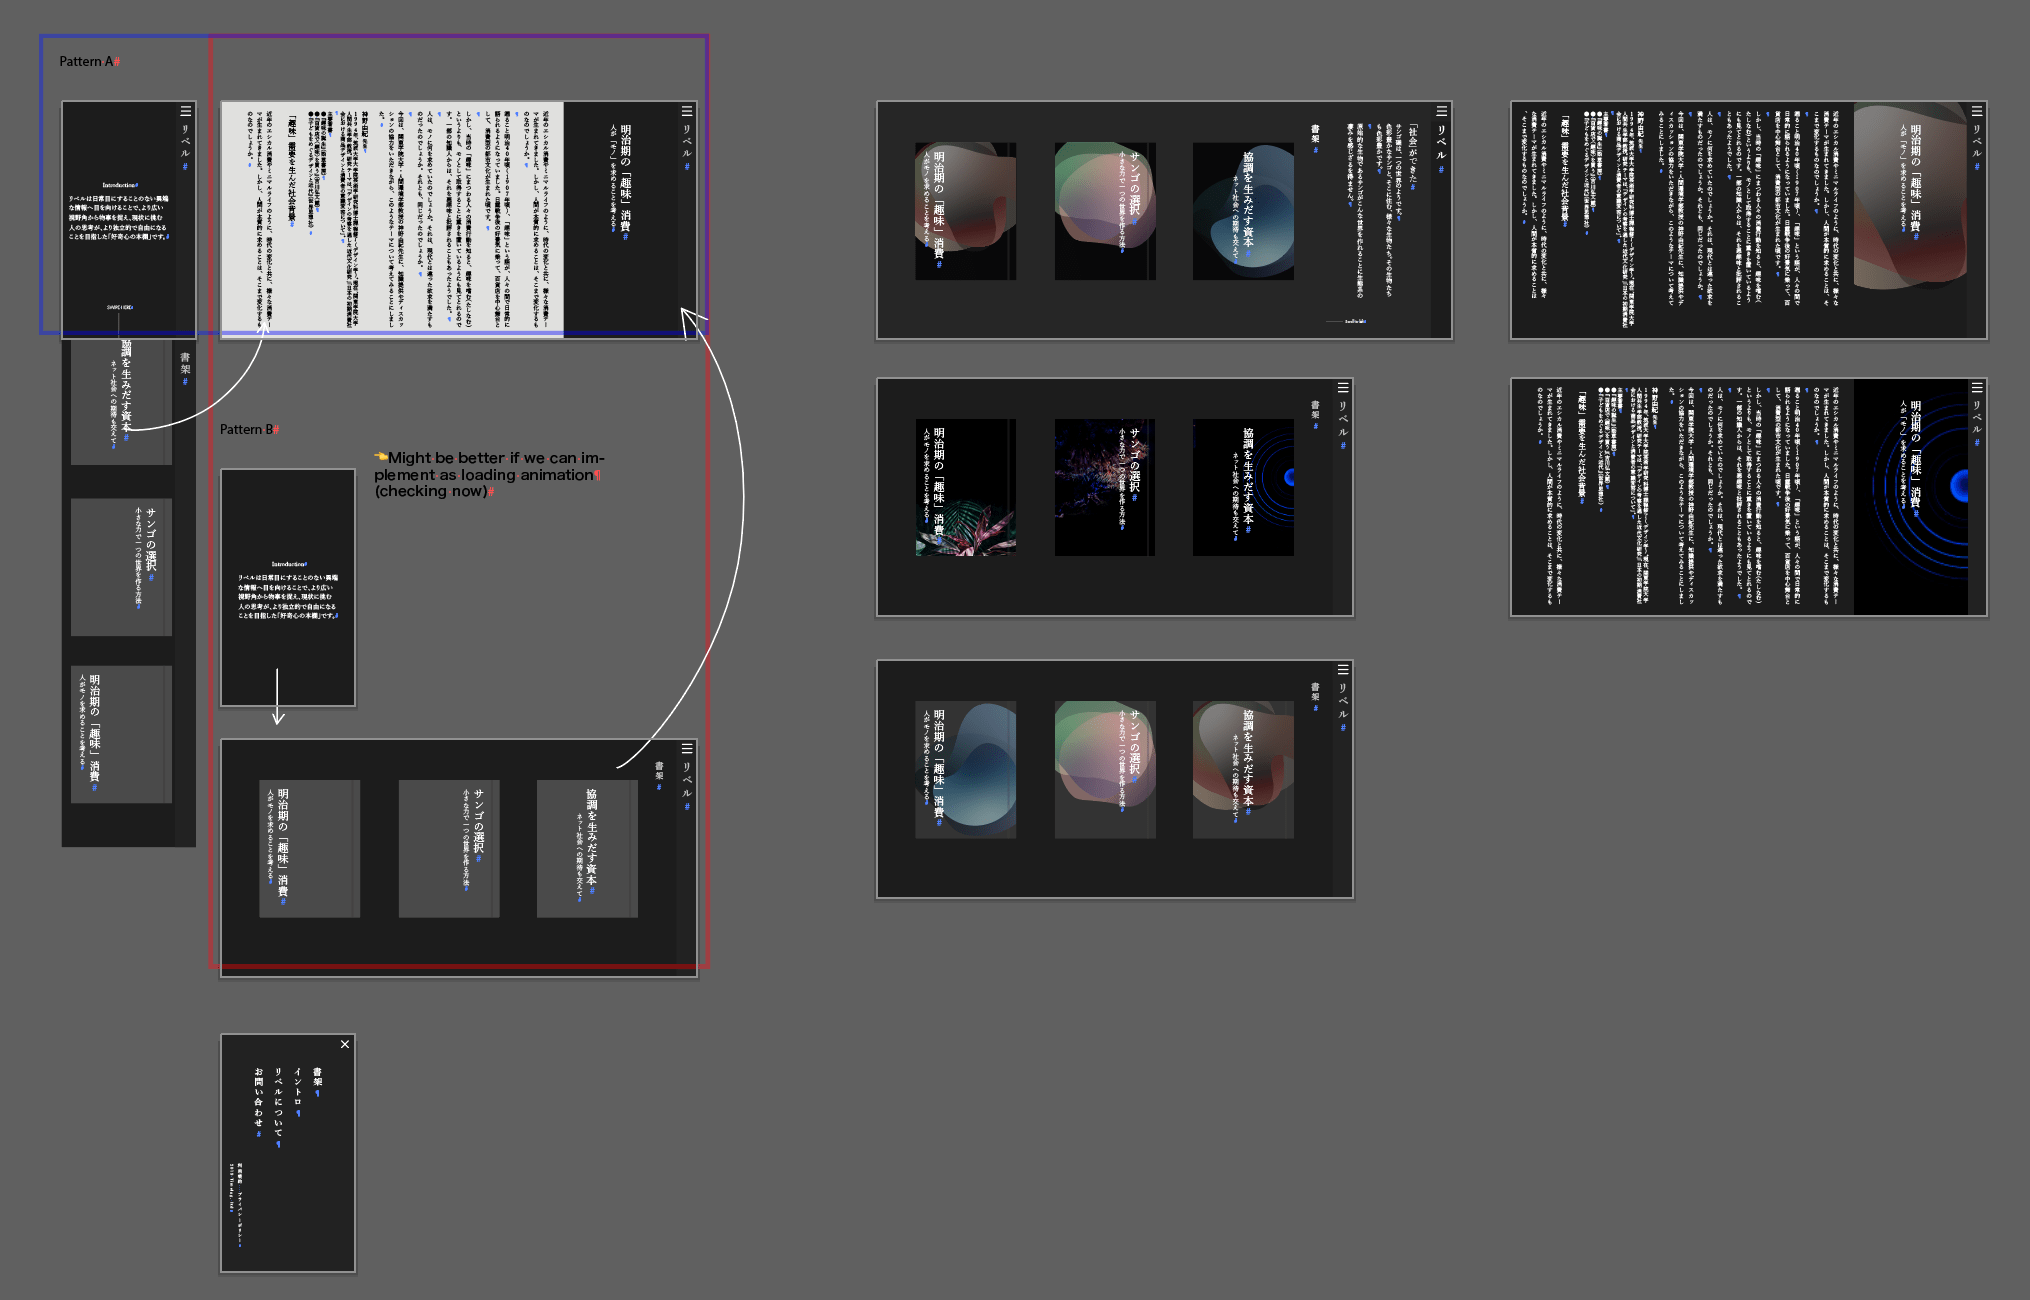 Process of creating UI - Mobile